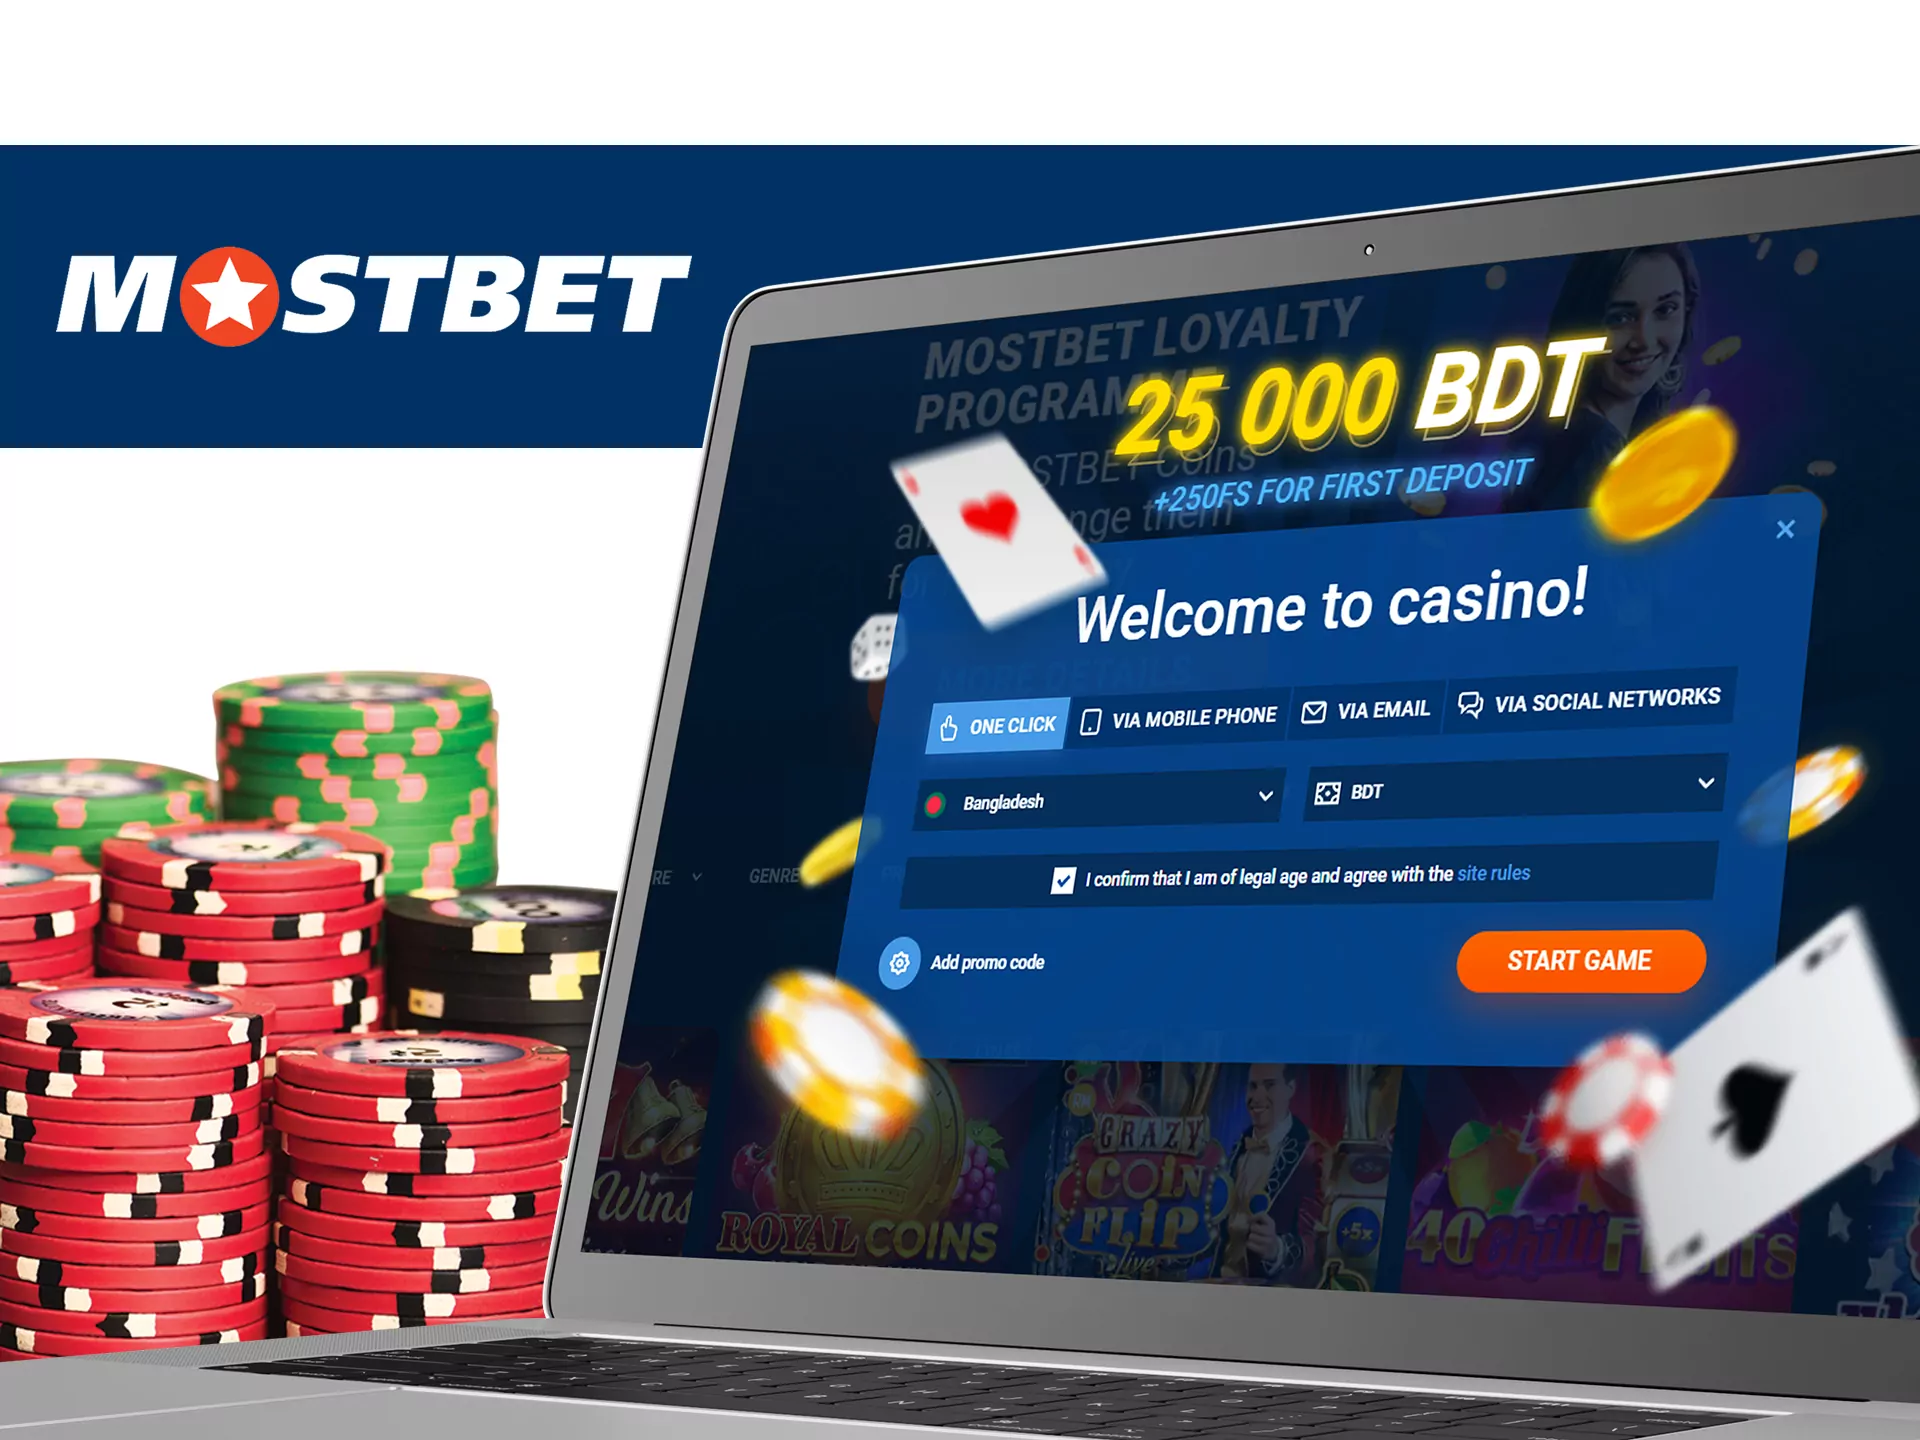 Registrate at Mostbet site for start playing casino games.